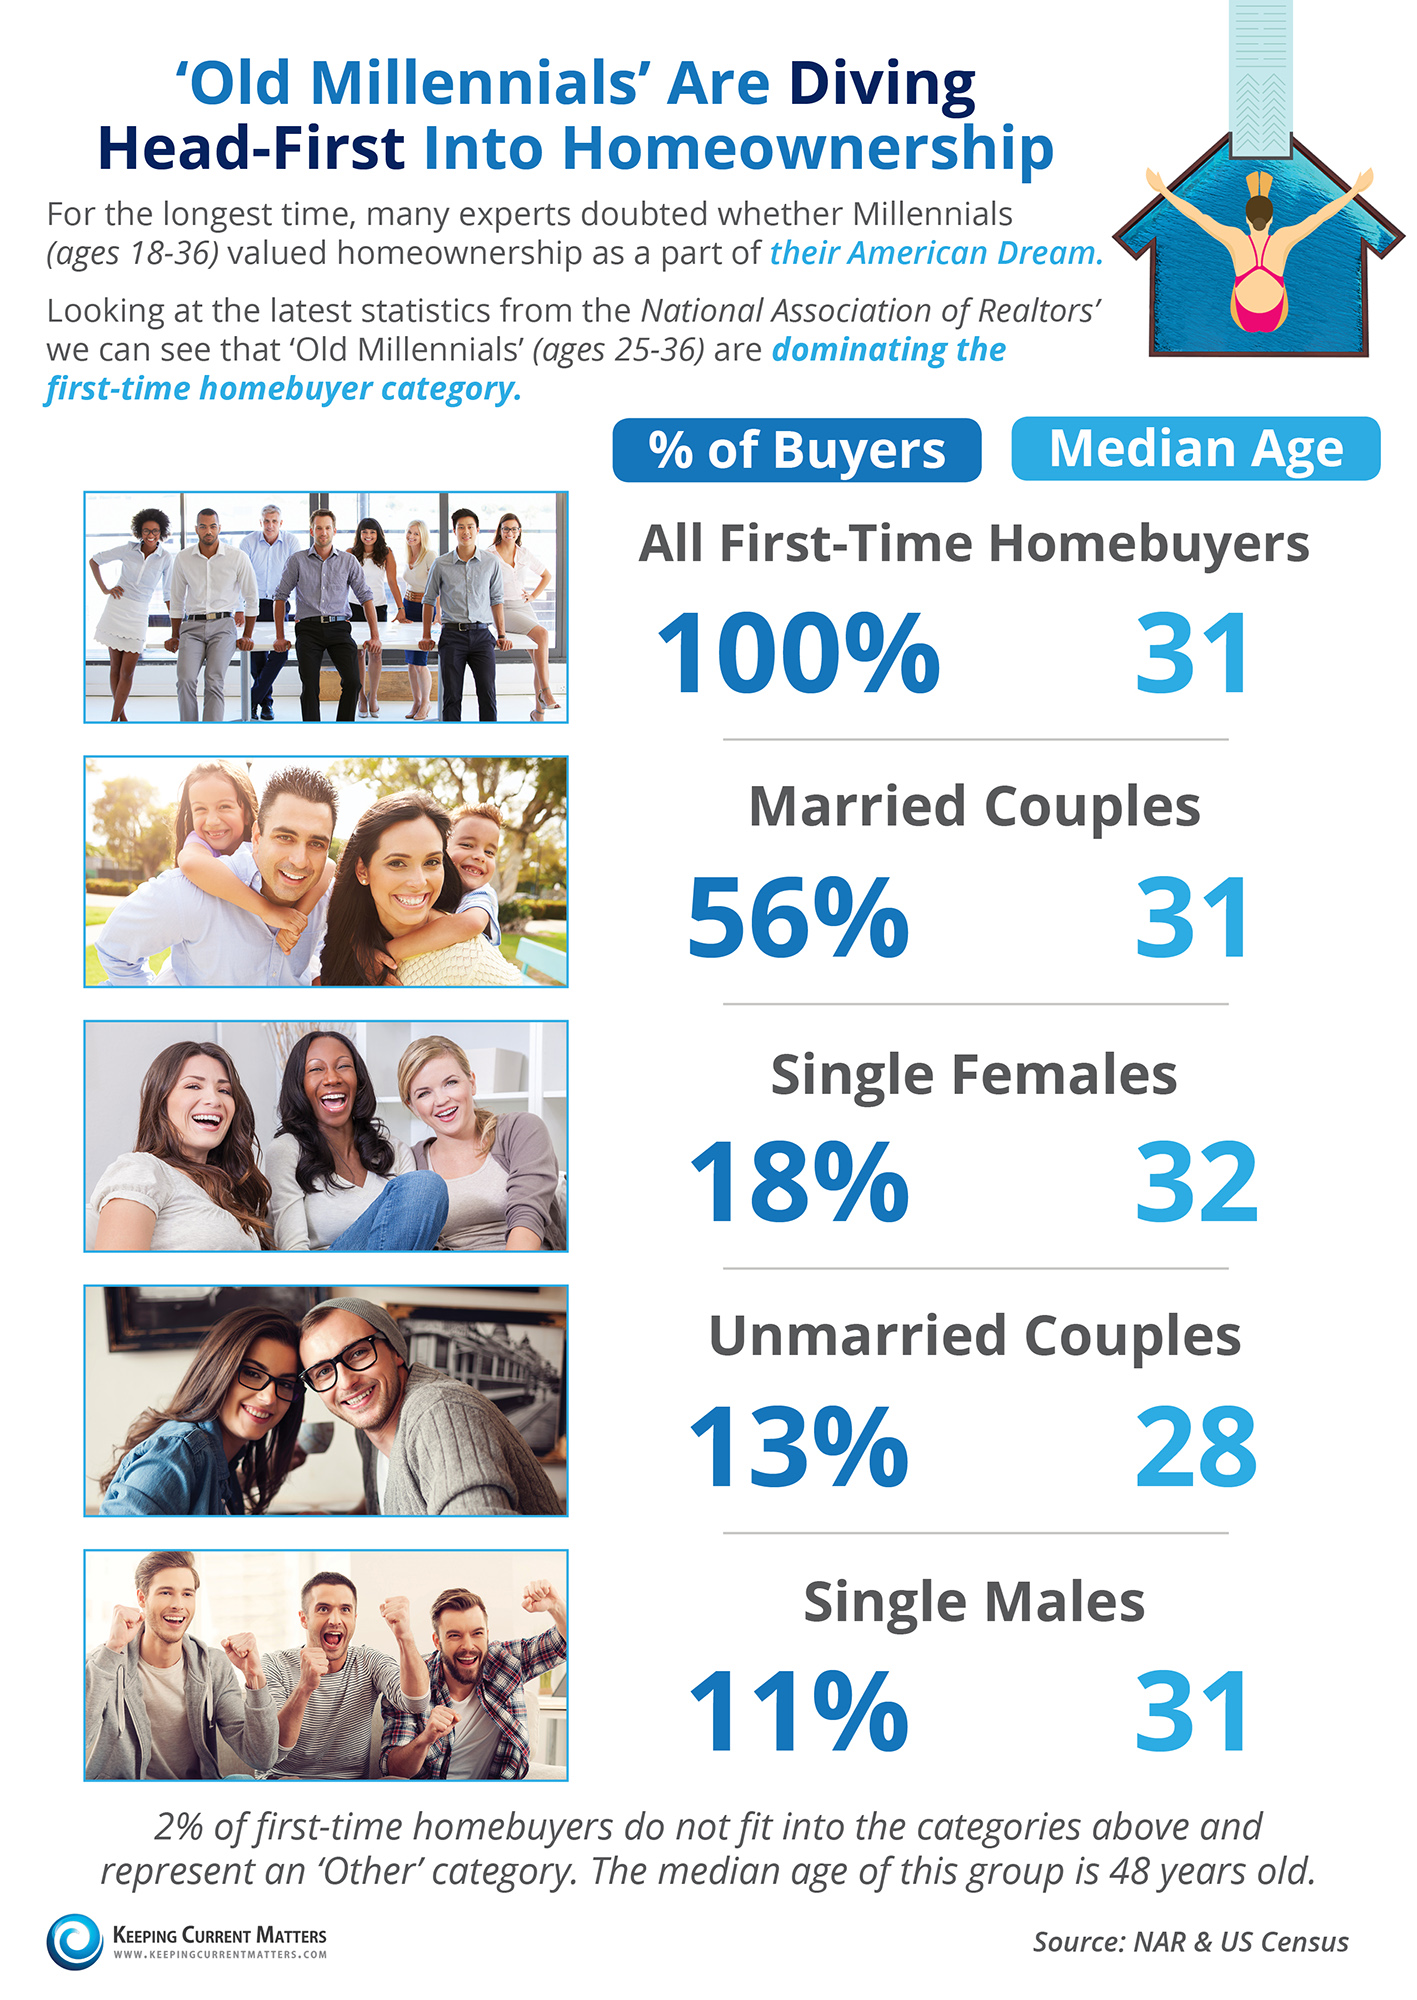 ‘Old Millennials’ Are Diving Head-First into Homeownership [INFOGRAPHIC] | Keeping Current Matters